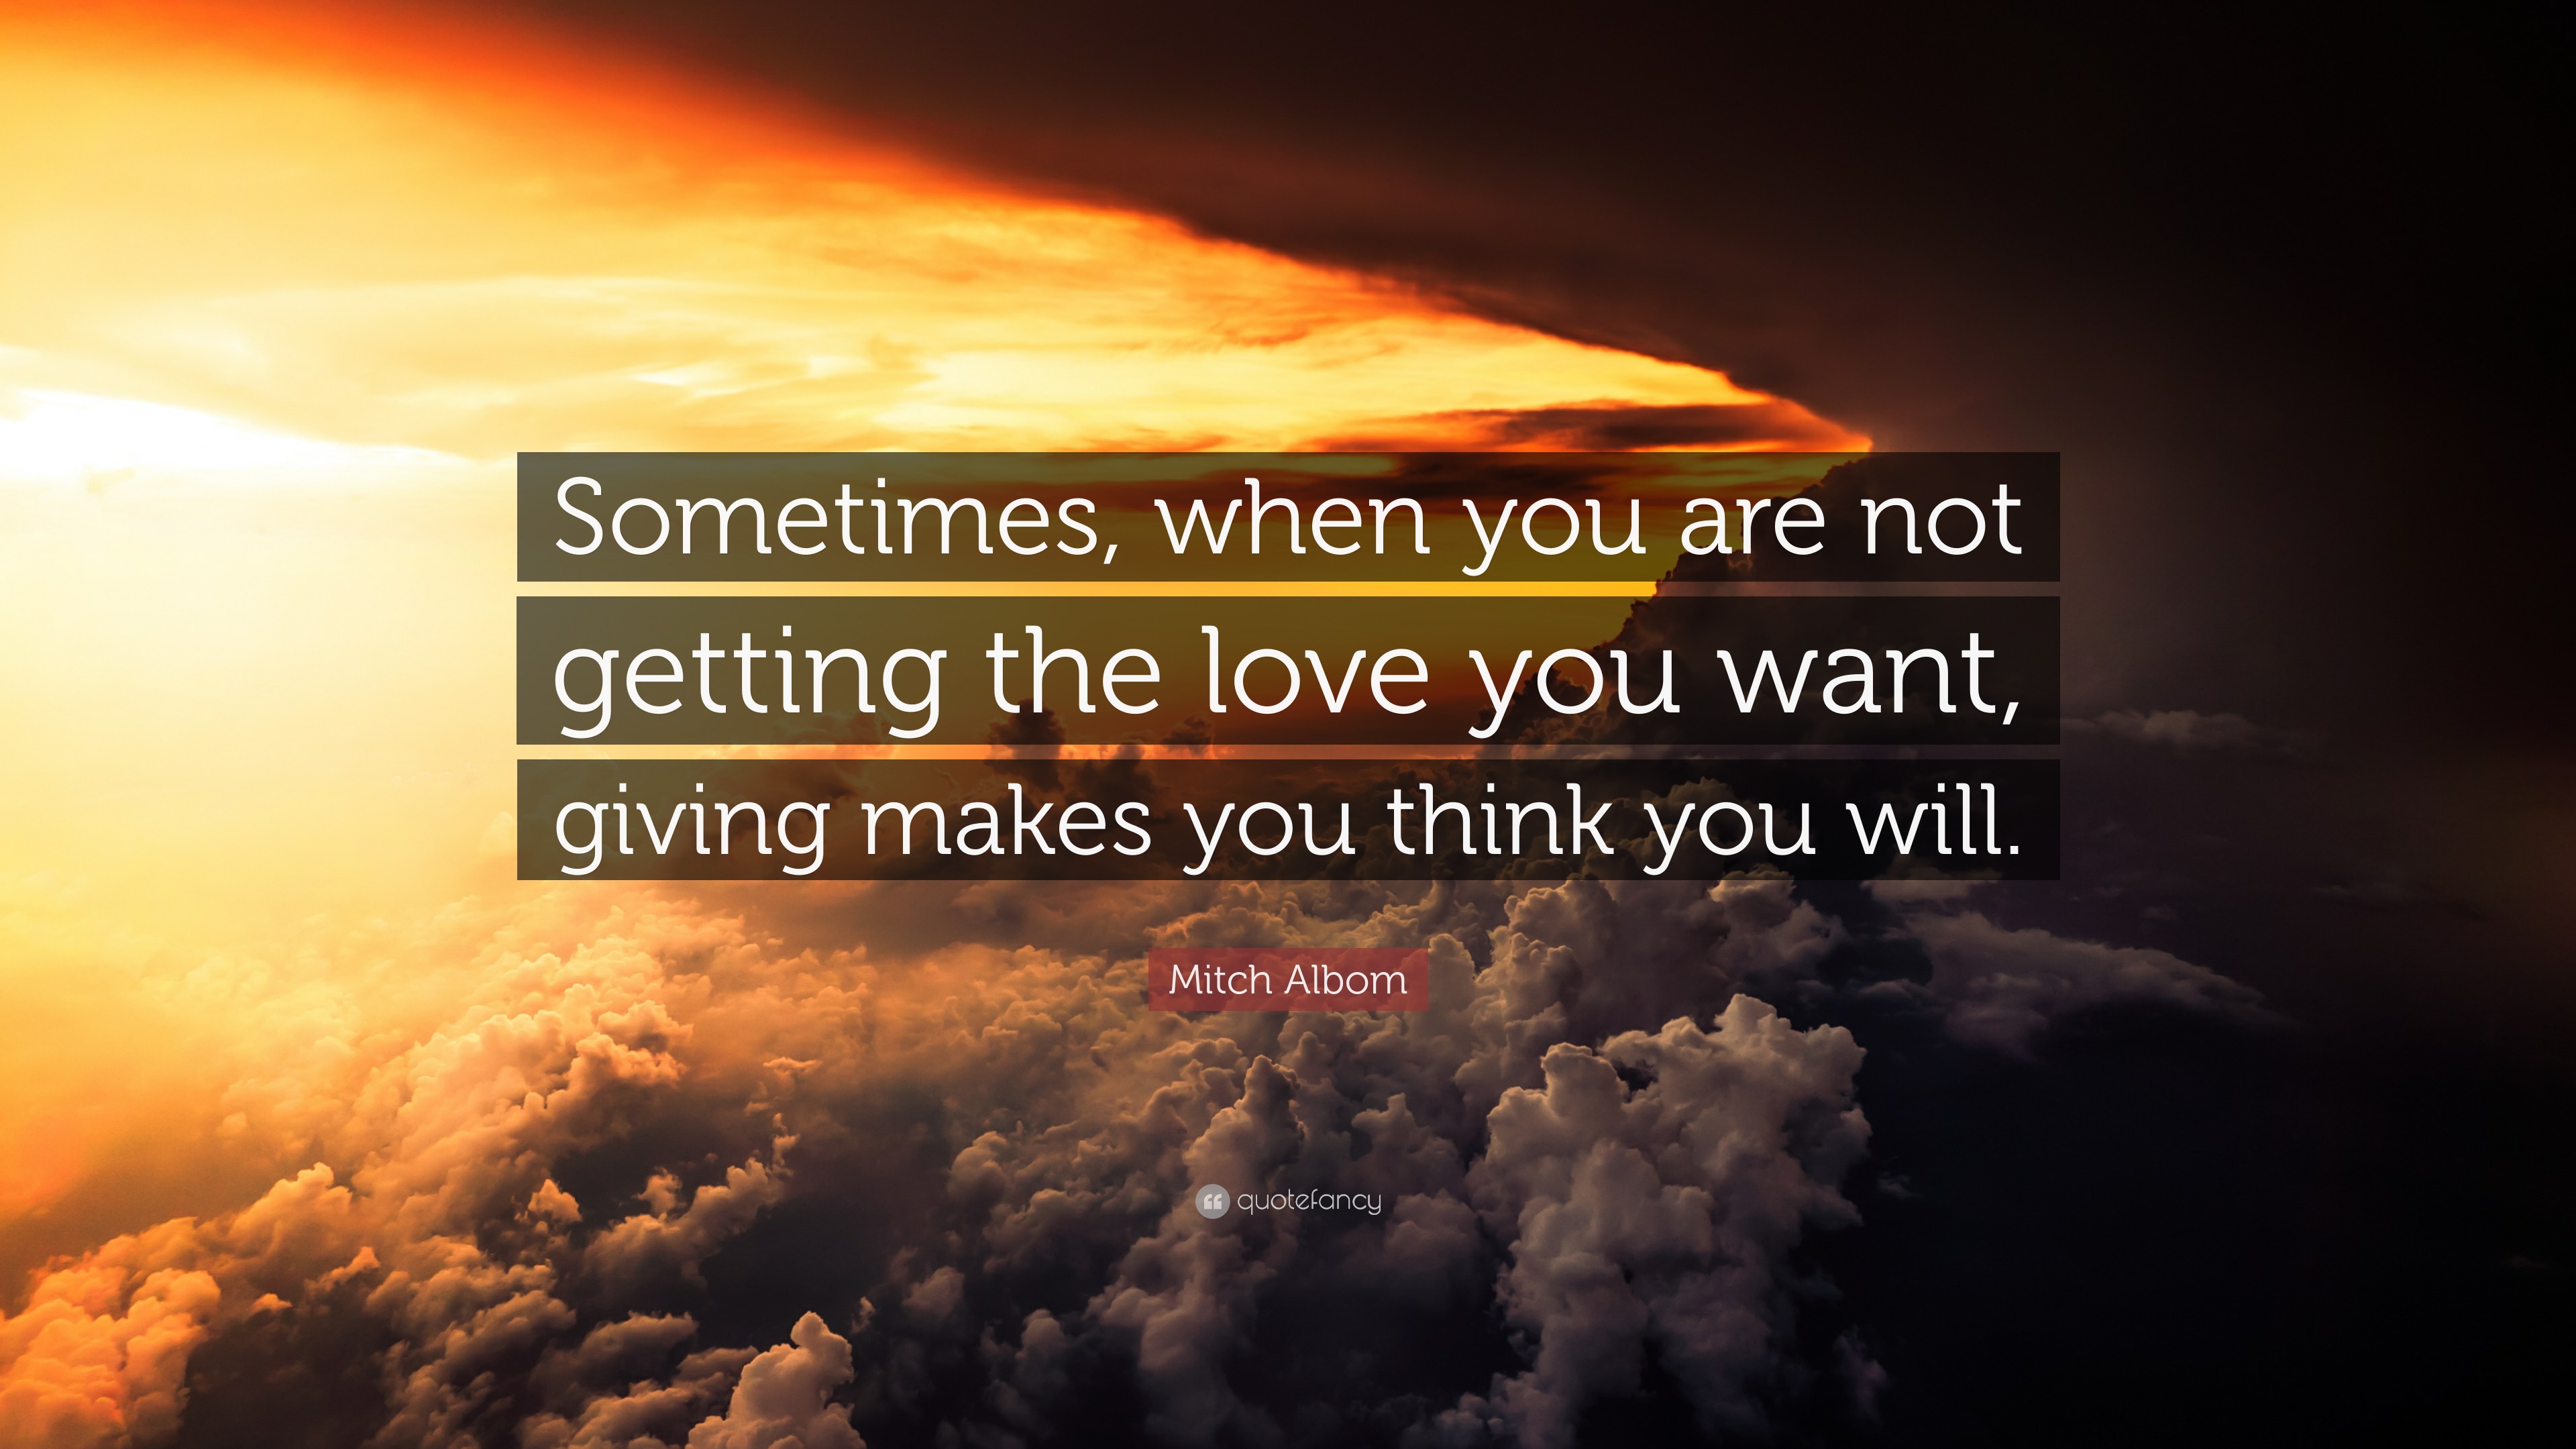 Mitch Albom Quote: "Sometimes, when you are not getting ...